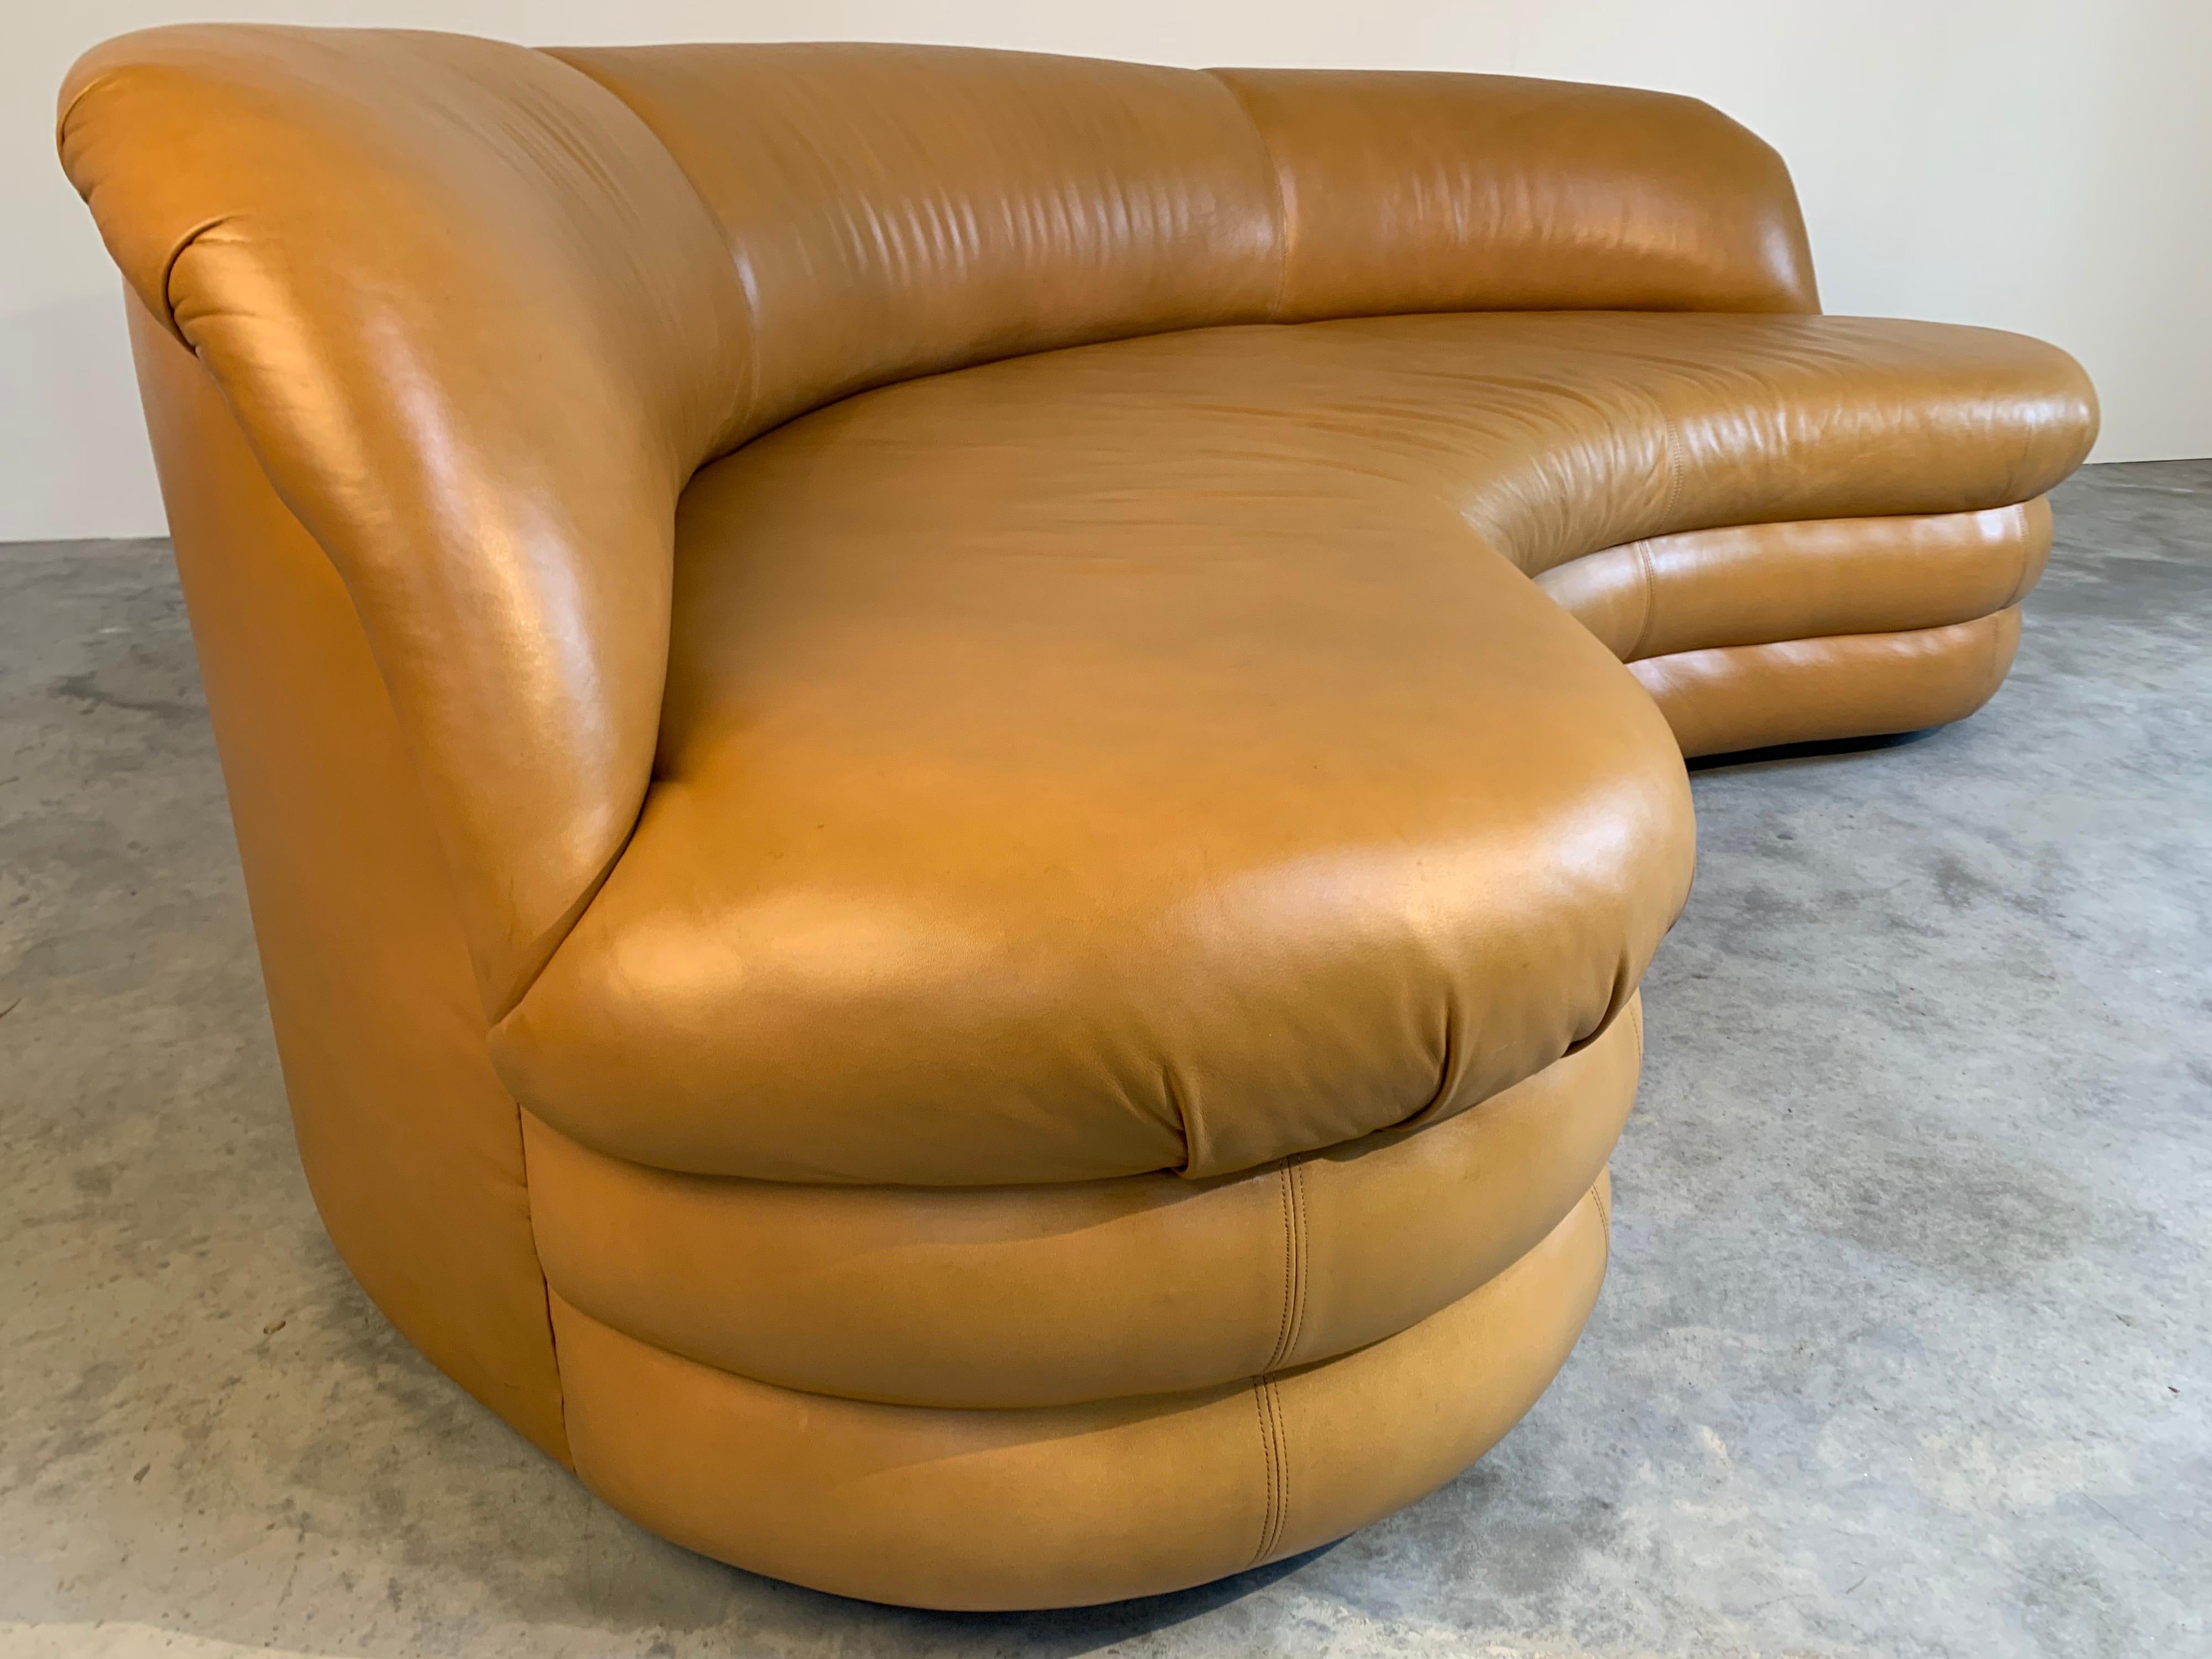 Late 20th Century Vladimir Kagan Sofa for Directional Biomorphic Kidney Form in Caramel Leather